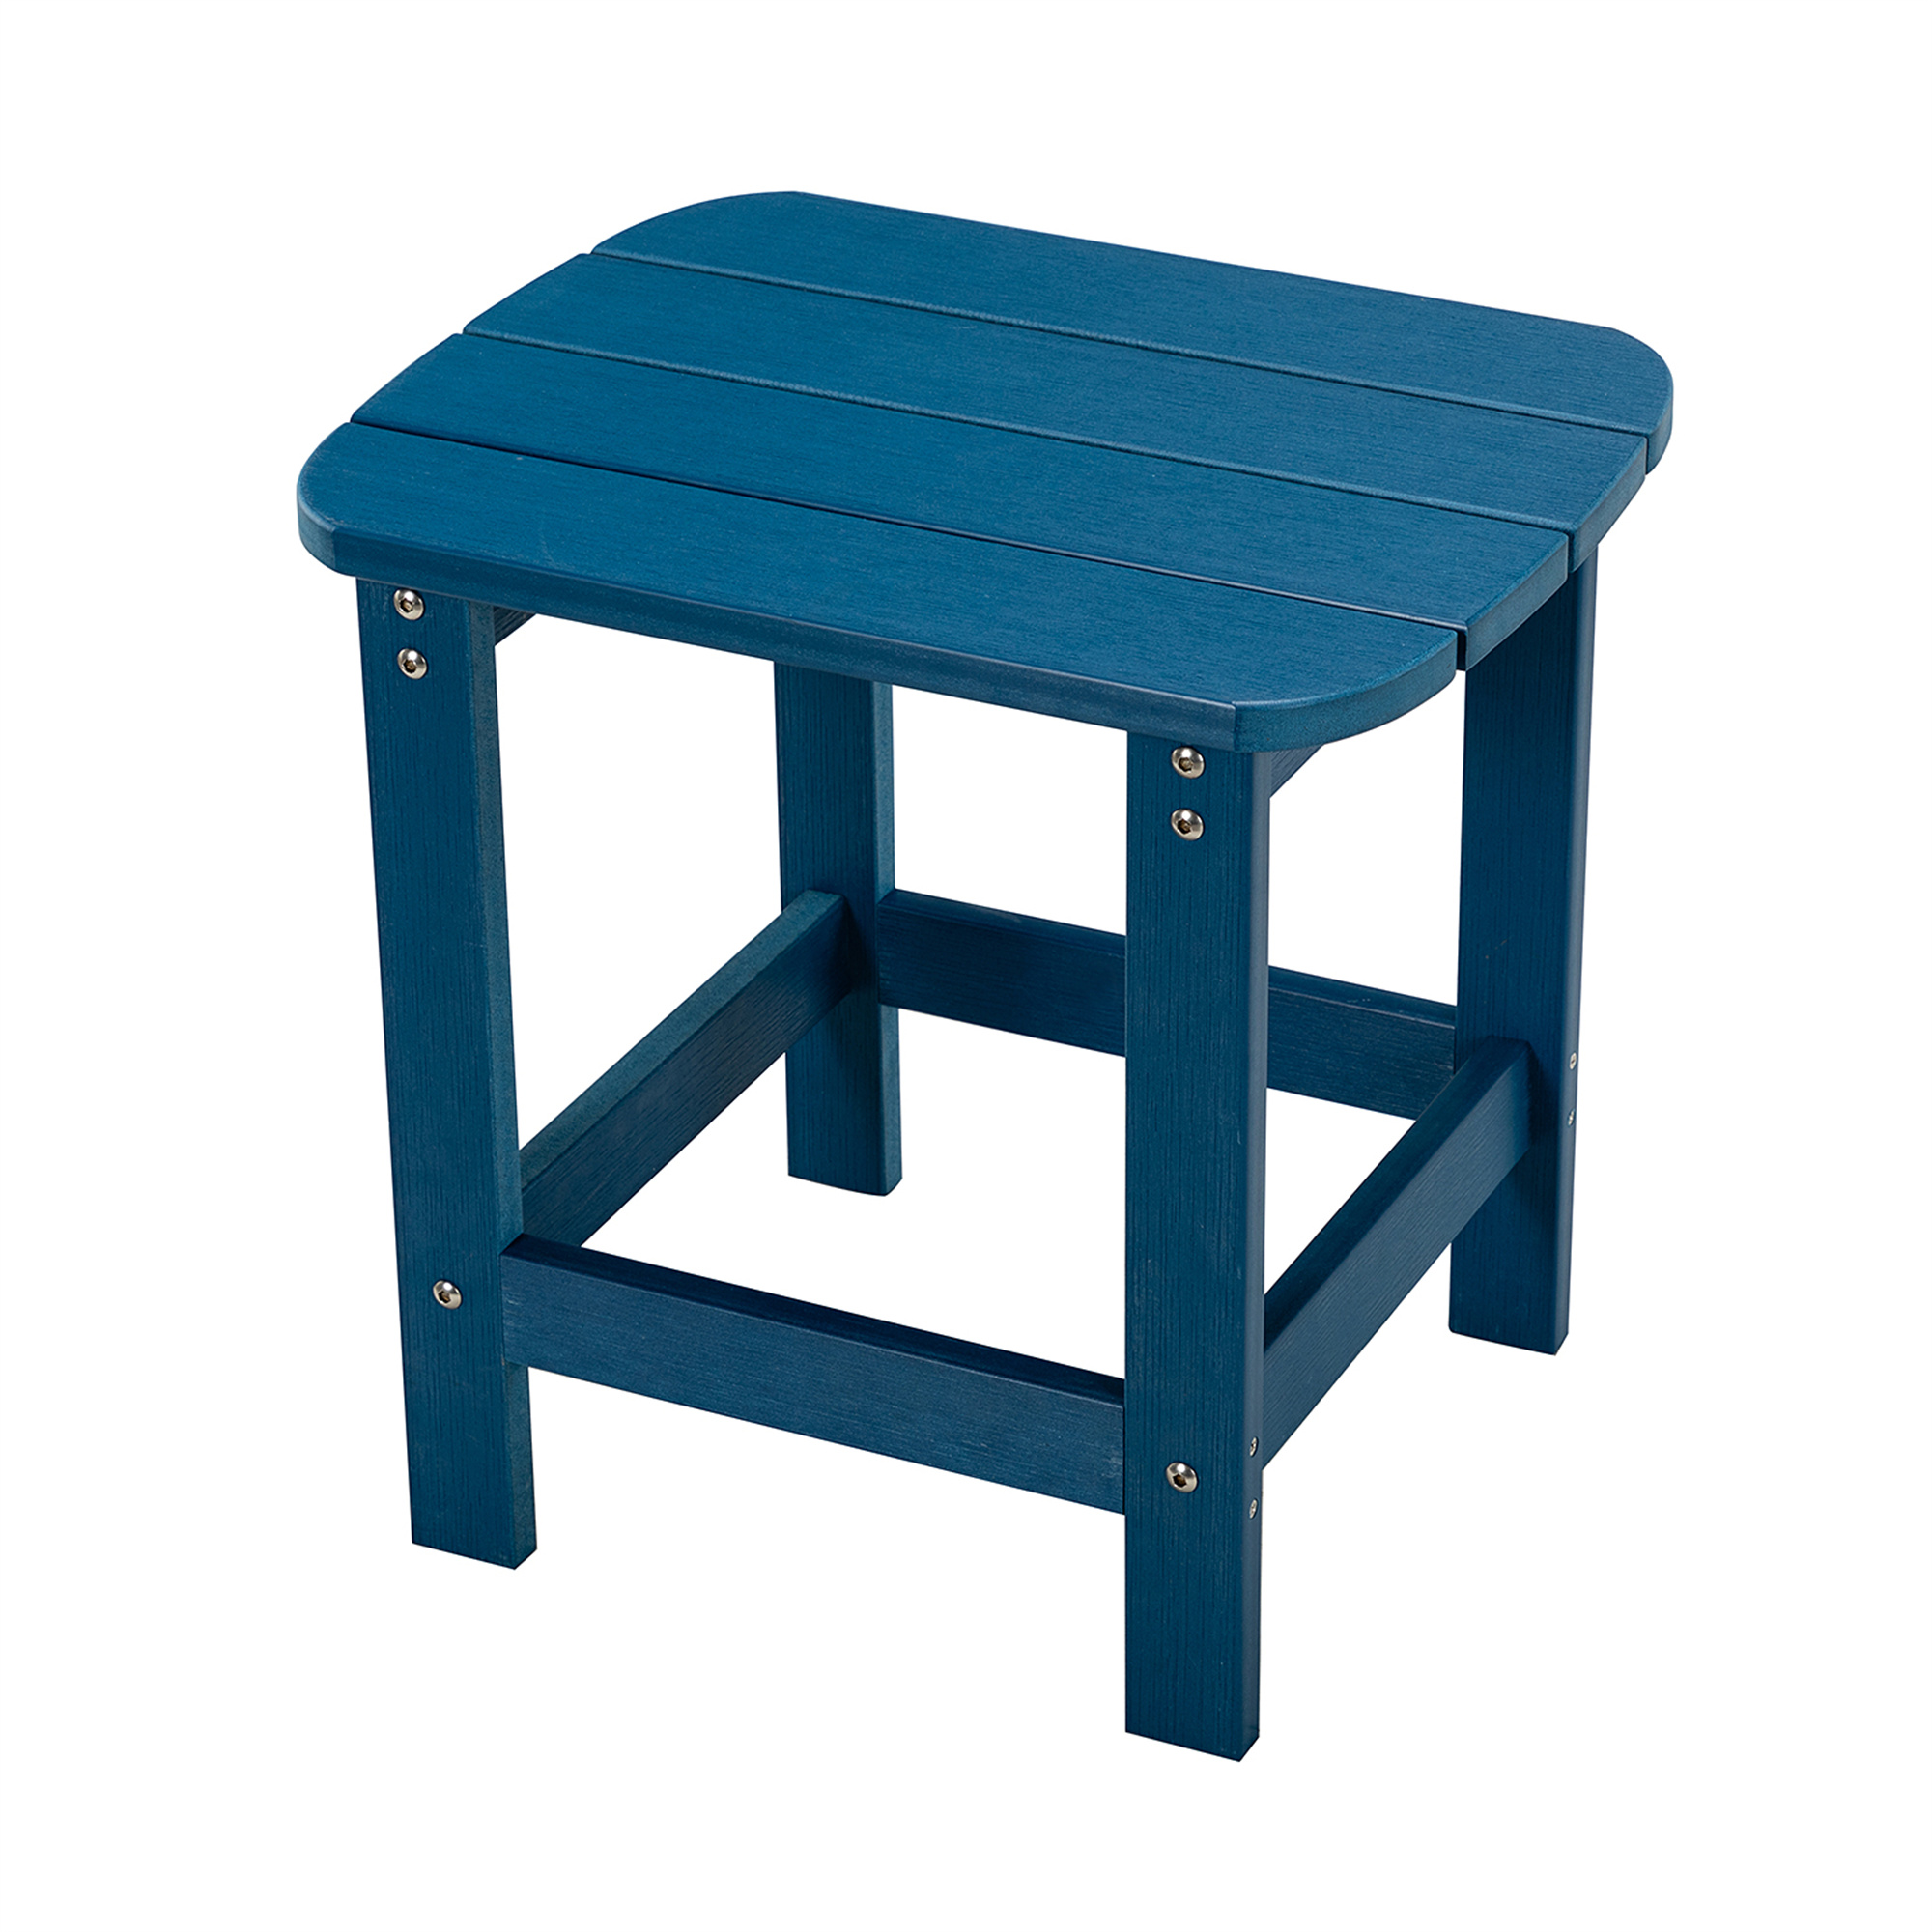 Cfowner Square Outdoor Side Table, Pool Composite Patio Table, End Tables for Backyard, Easy Maintenance, Navy - image 3 of 7